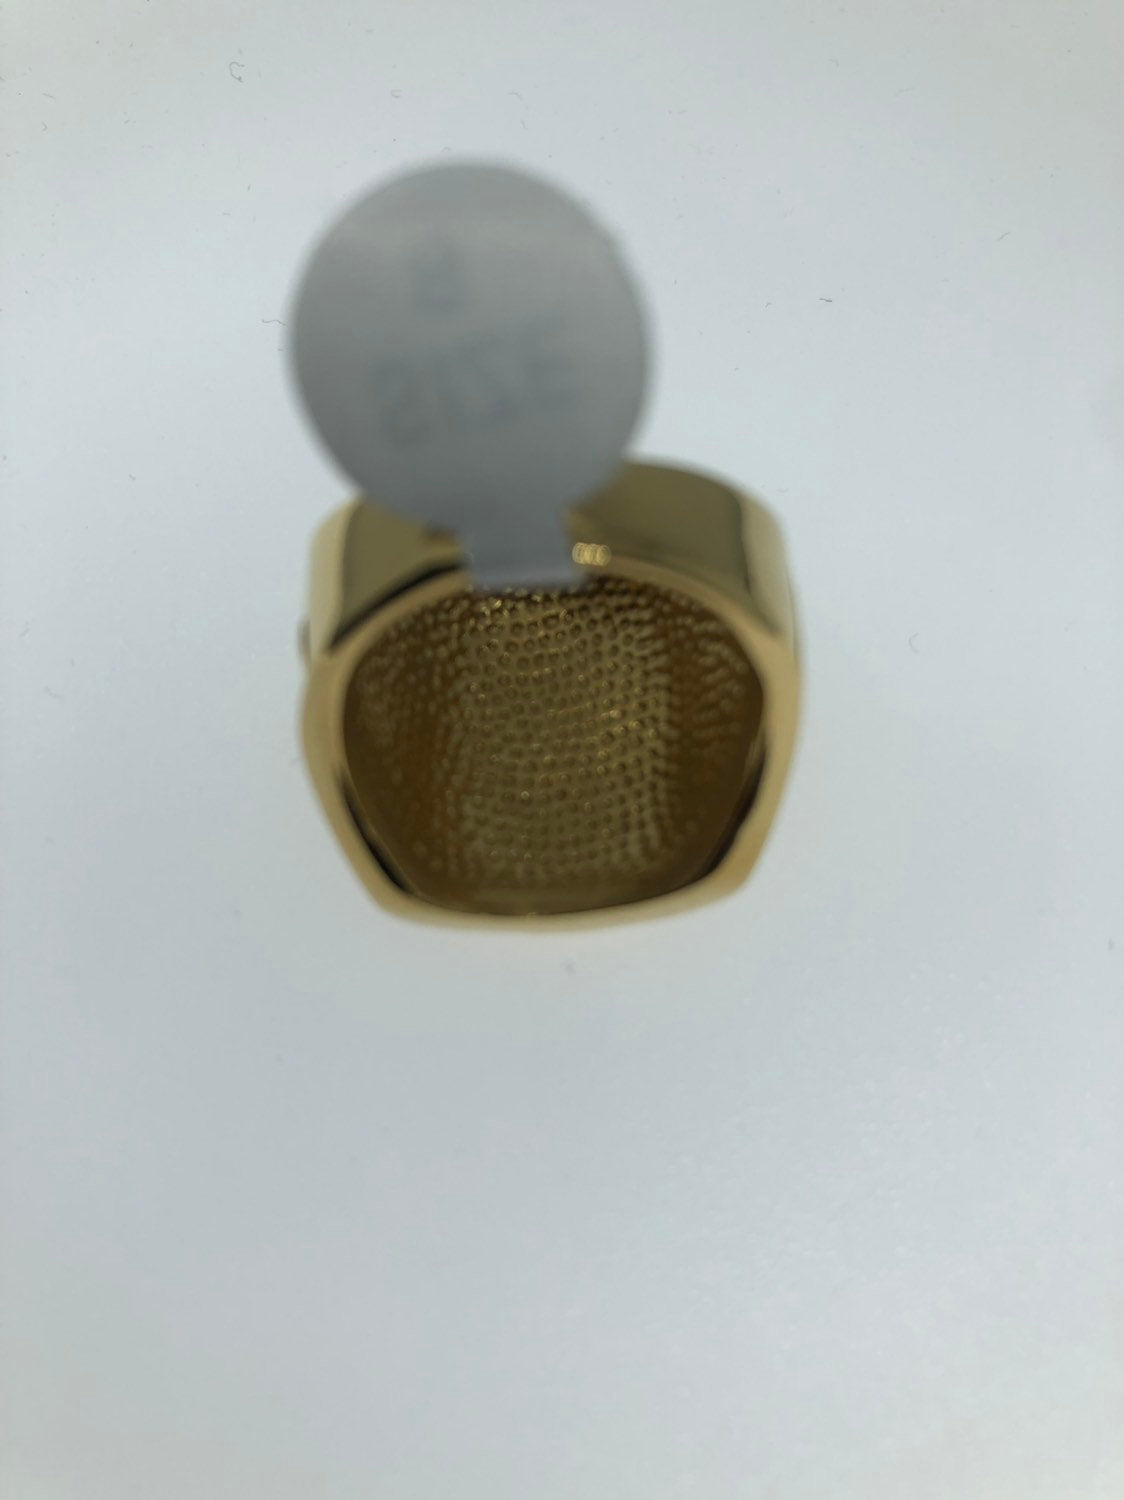 Vintage Gothic Golden Stainless Steel Free Mason G Mens Ring